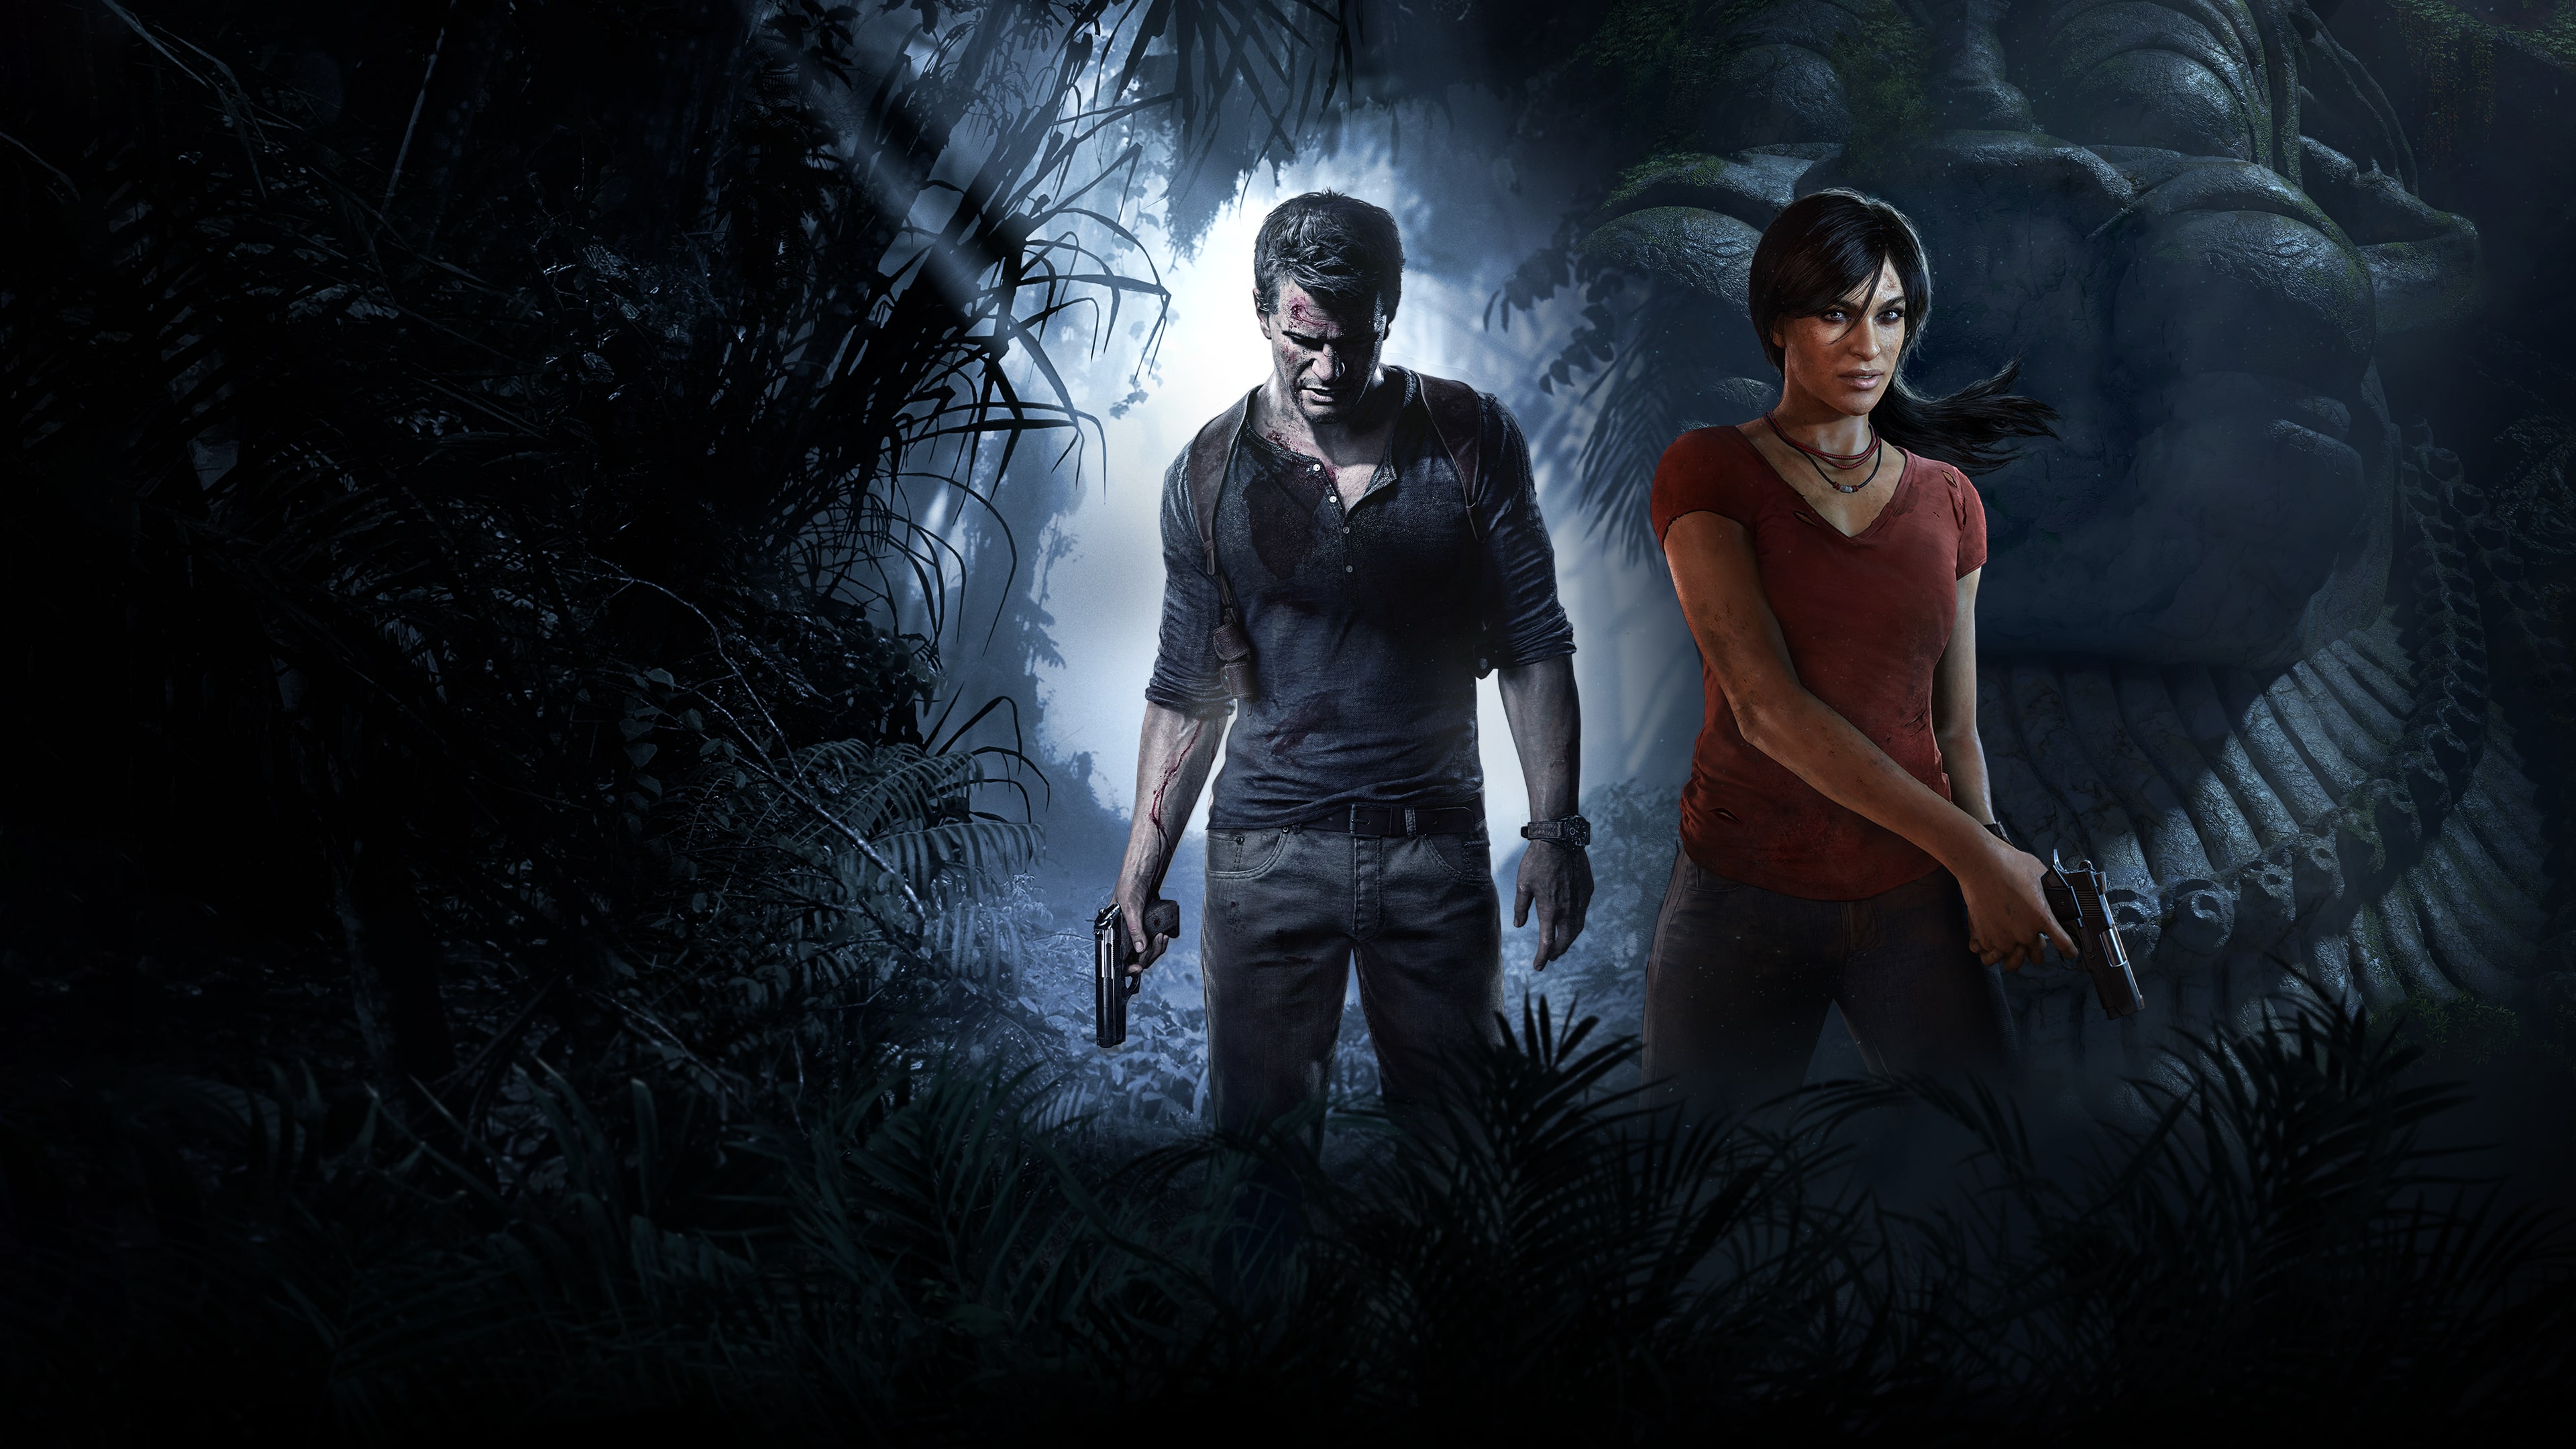 Pacote digital com UNCHARTED 4: A Thief's End e UNCHARTED: The Lost Legacy